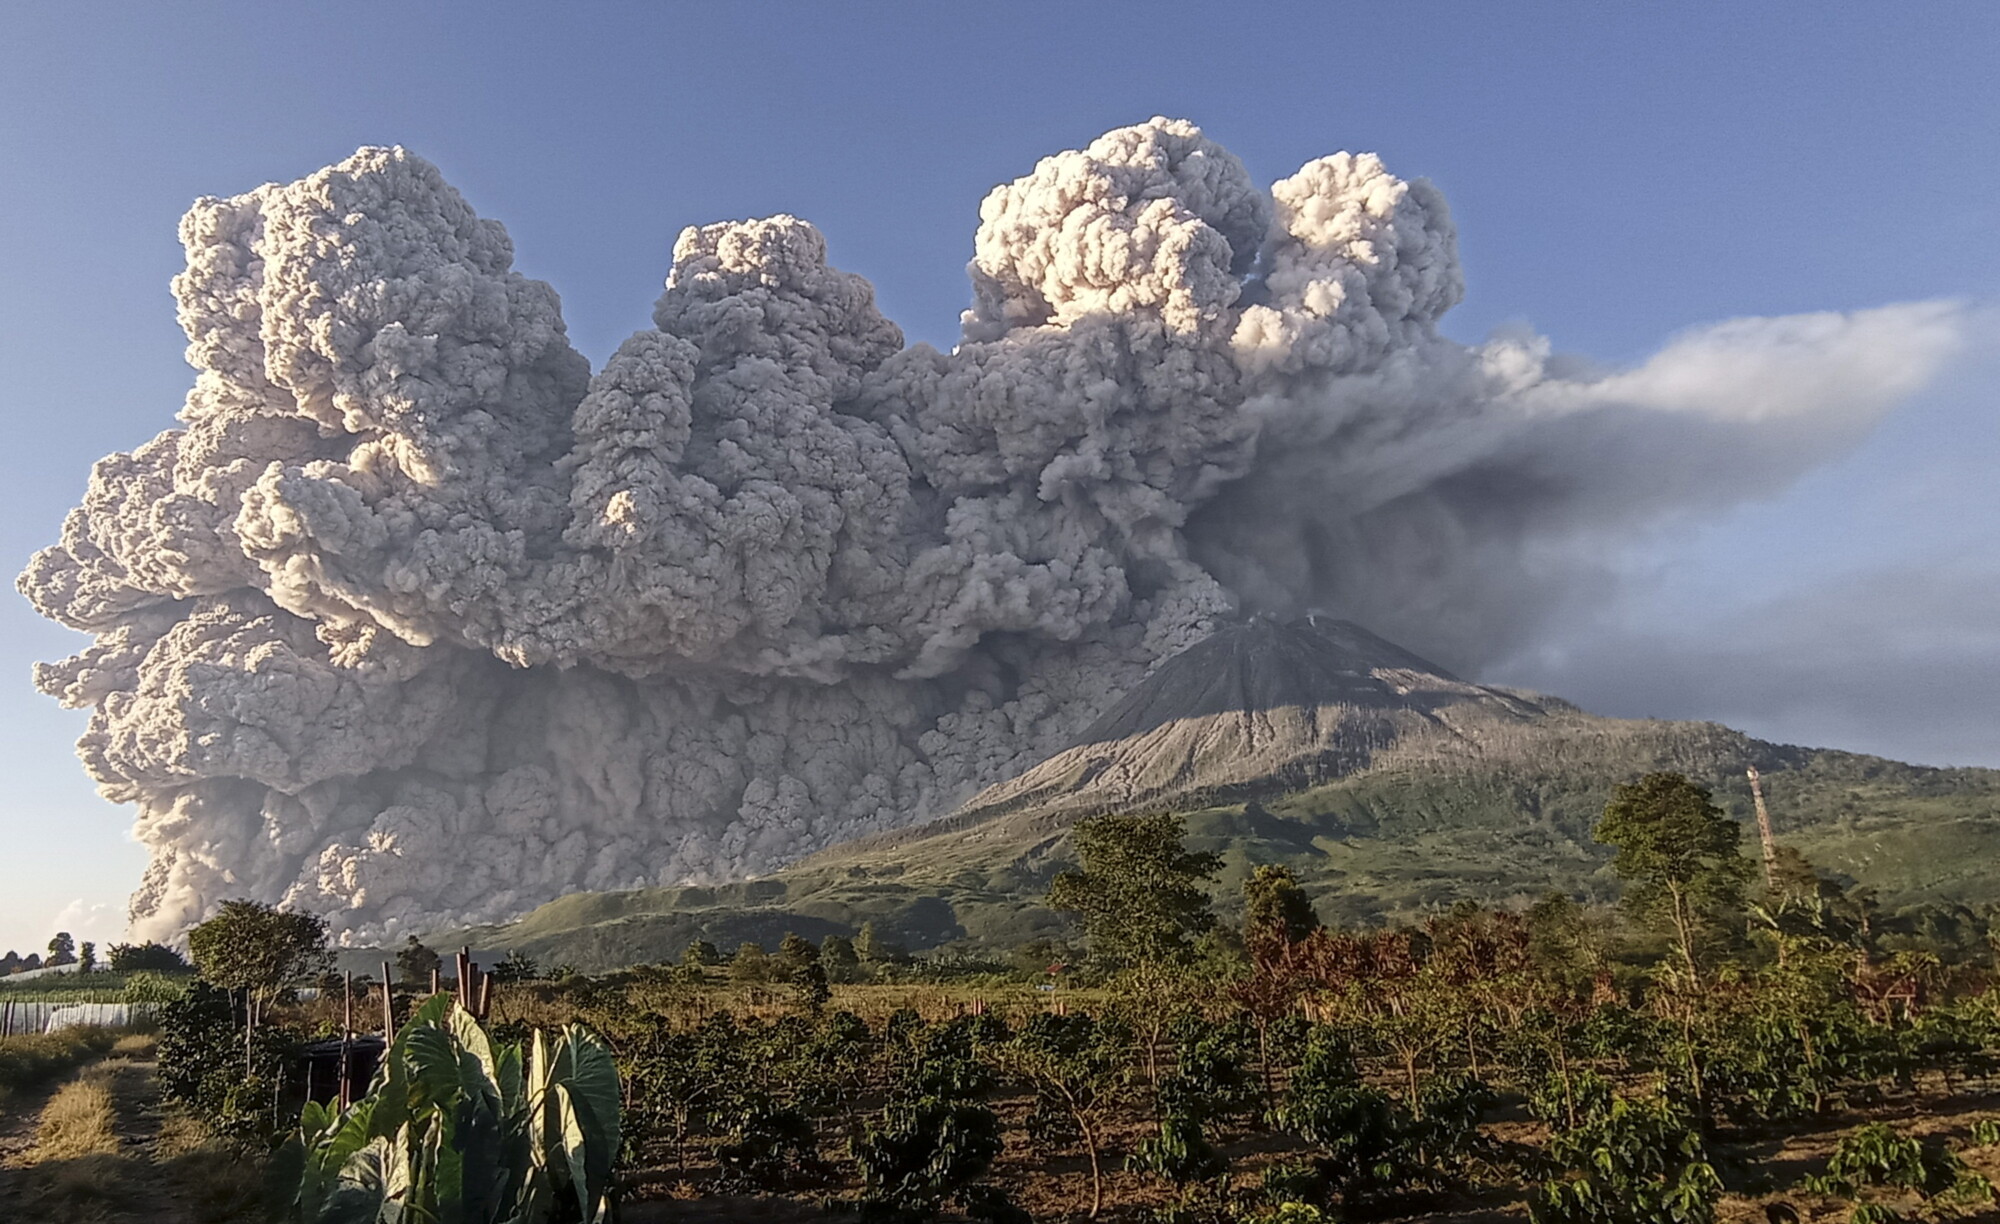 Indonesia’s Mount Sinabung Volcano Spews Ash Into Sky